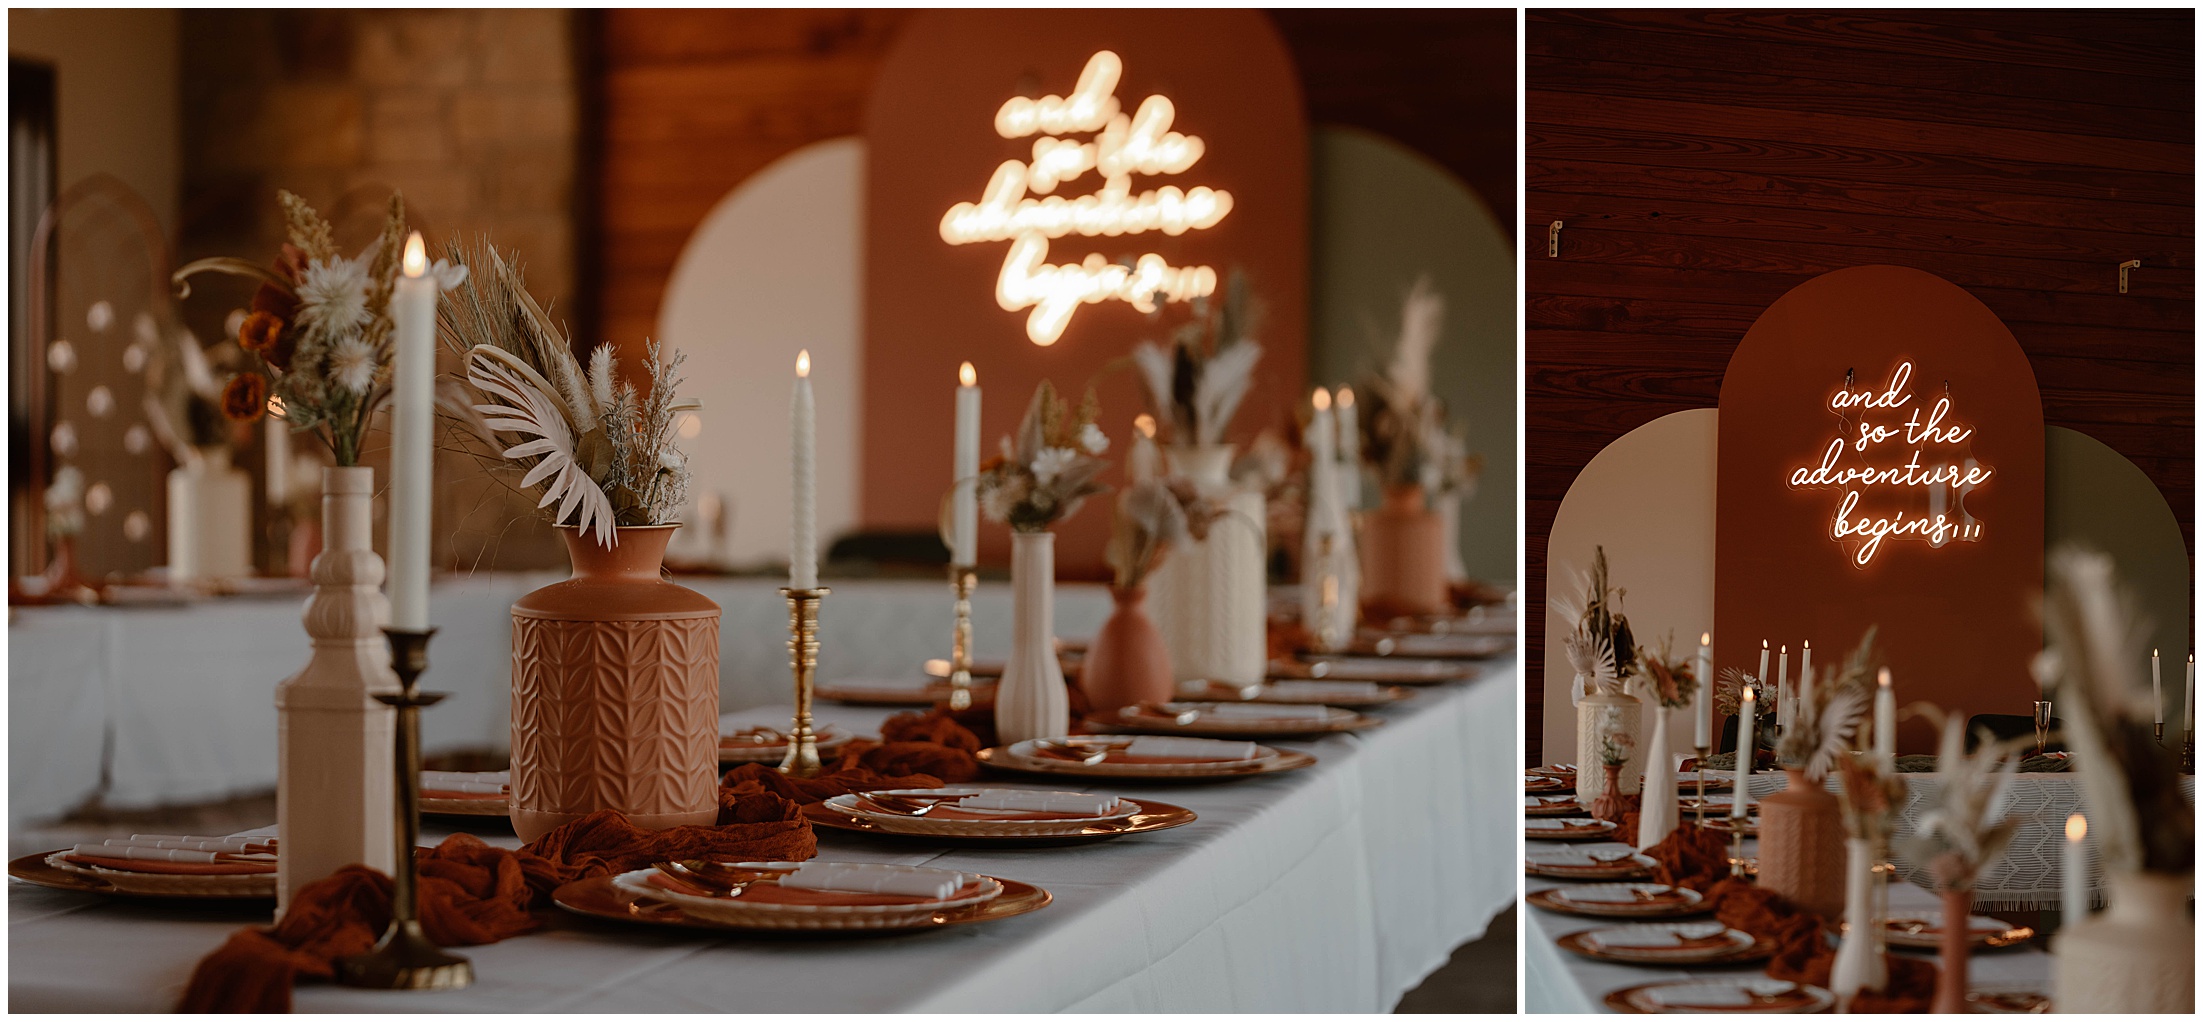 Texas adventure elopement packages, texas elopement, palo duro canyon elopement, palo duro canyon wedding, spring texas wedding, brit nicole photography, doves rest cabins, Places to elope in Texas, desert wedding, wedding decor details, elopement decor ideas